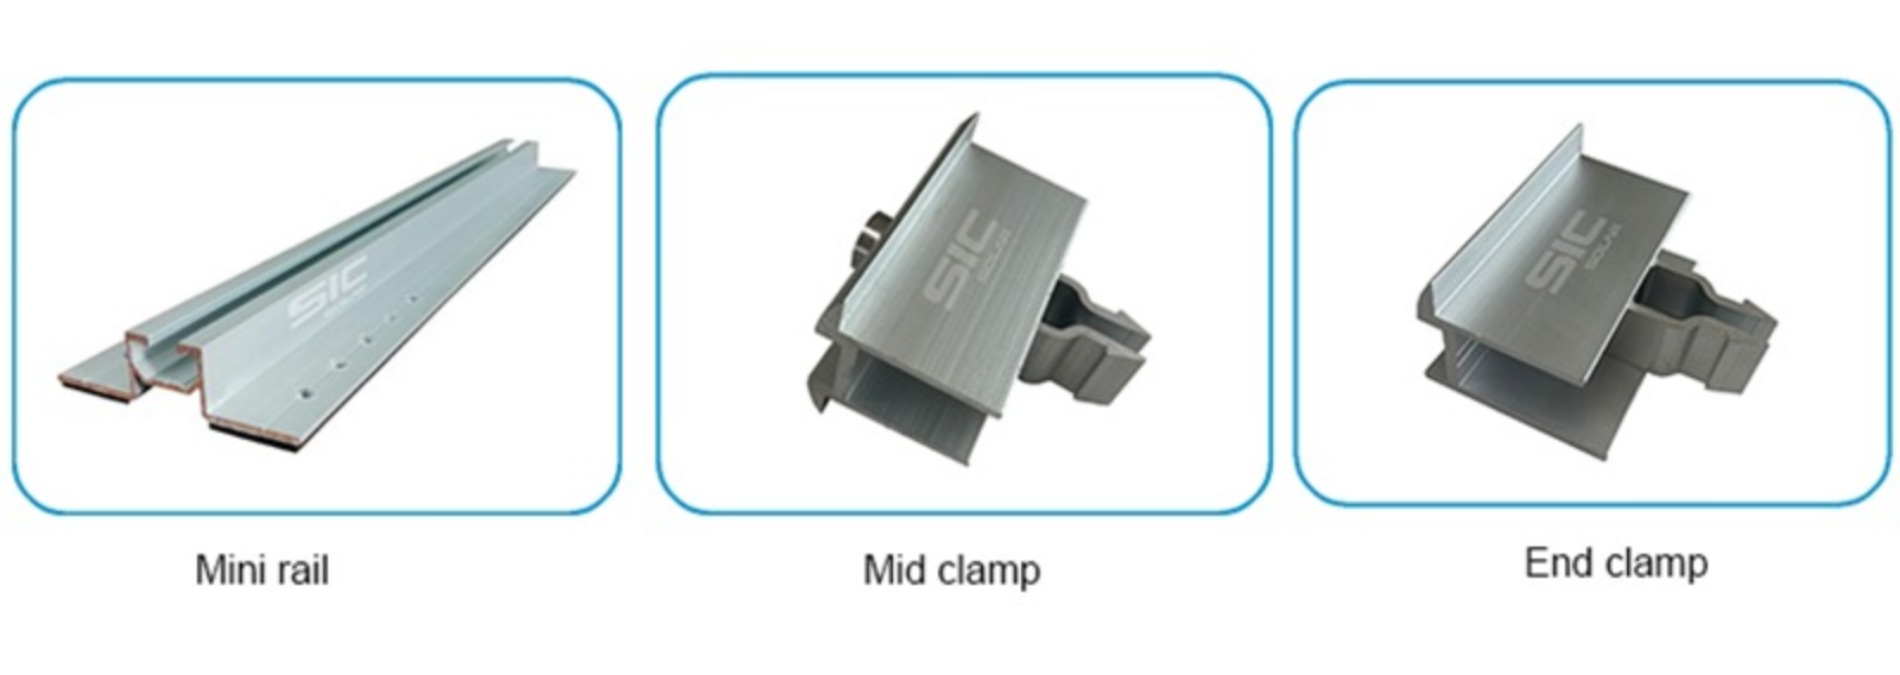 Mid clamp and end clamp for mini rail